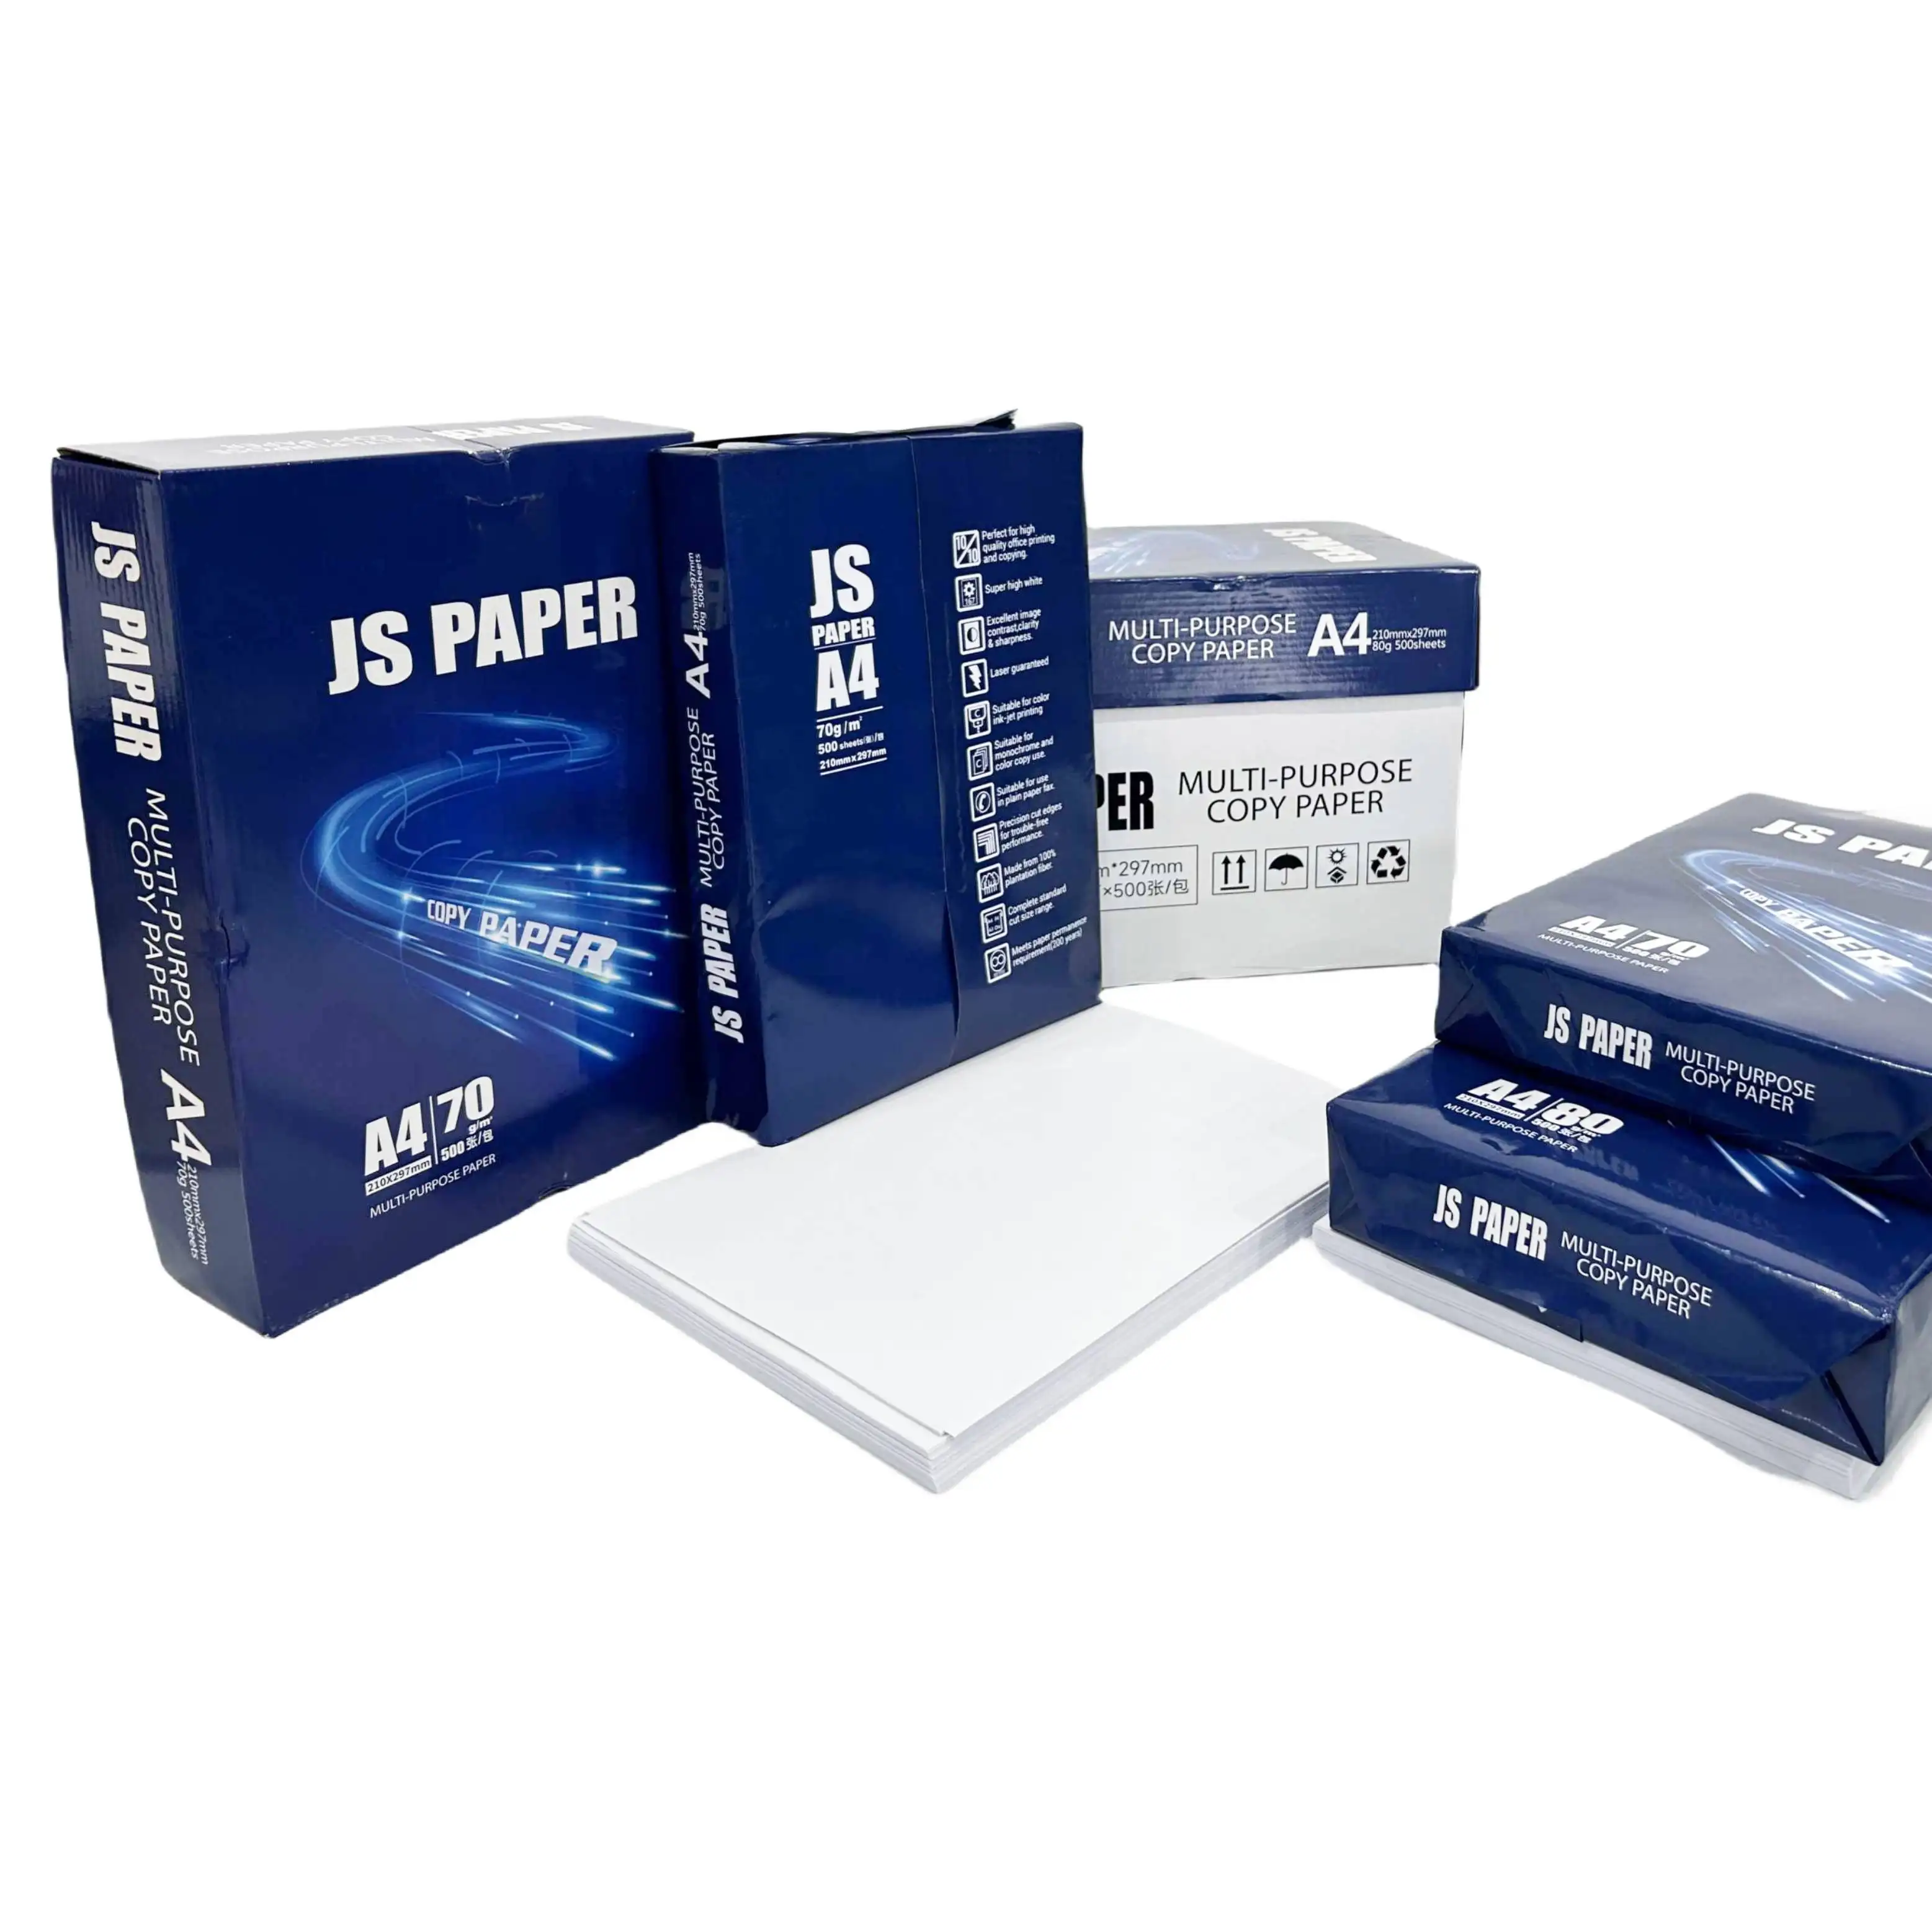 Wholesale cheap Price A4 Printer Paper A4 Browser Paper 70gsm 80gsm 5ream/box with high brightness